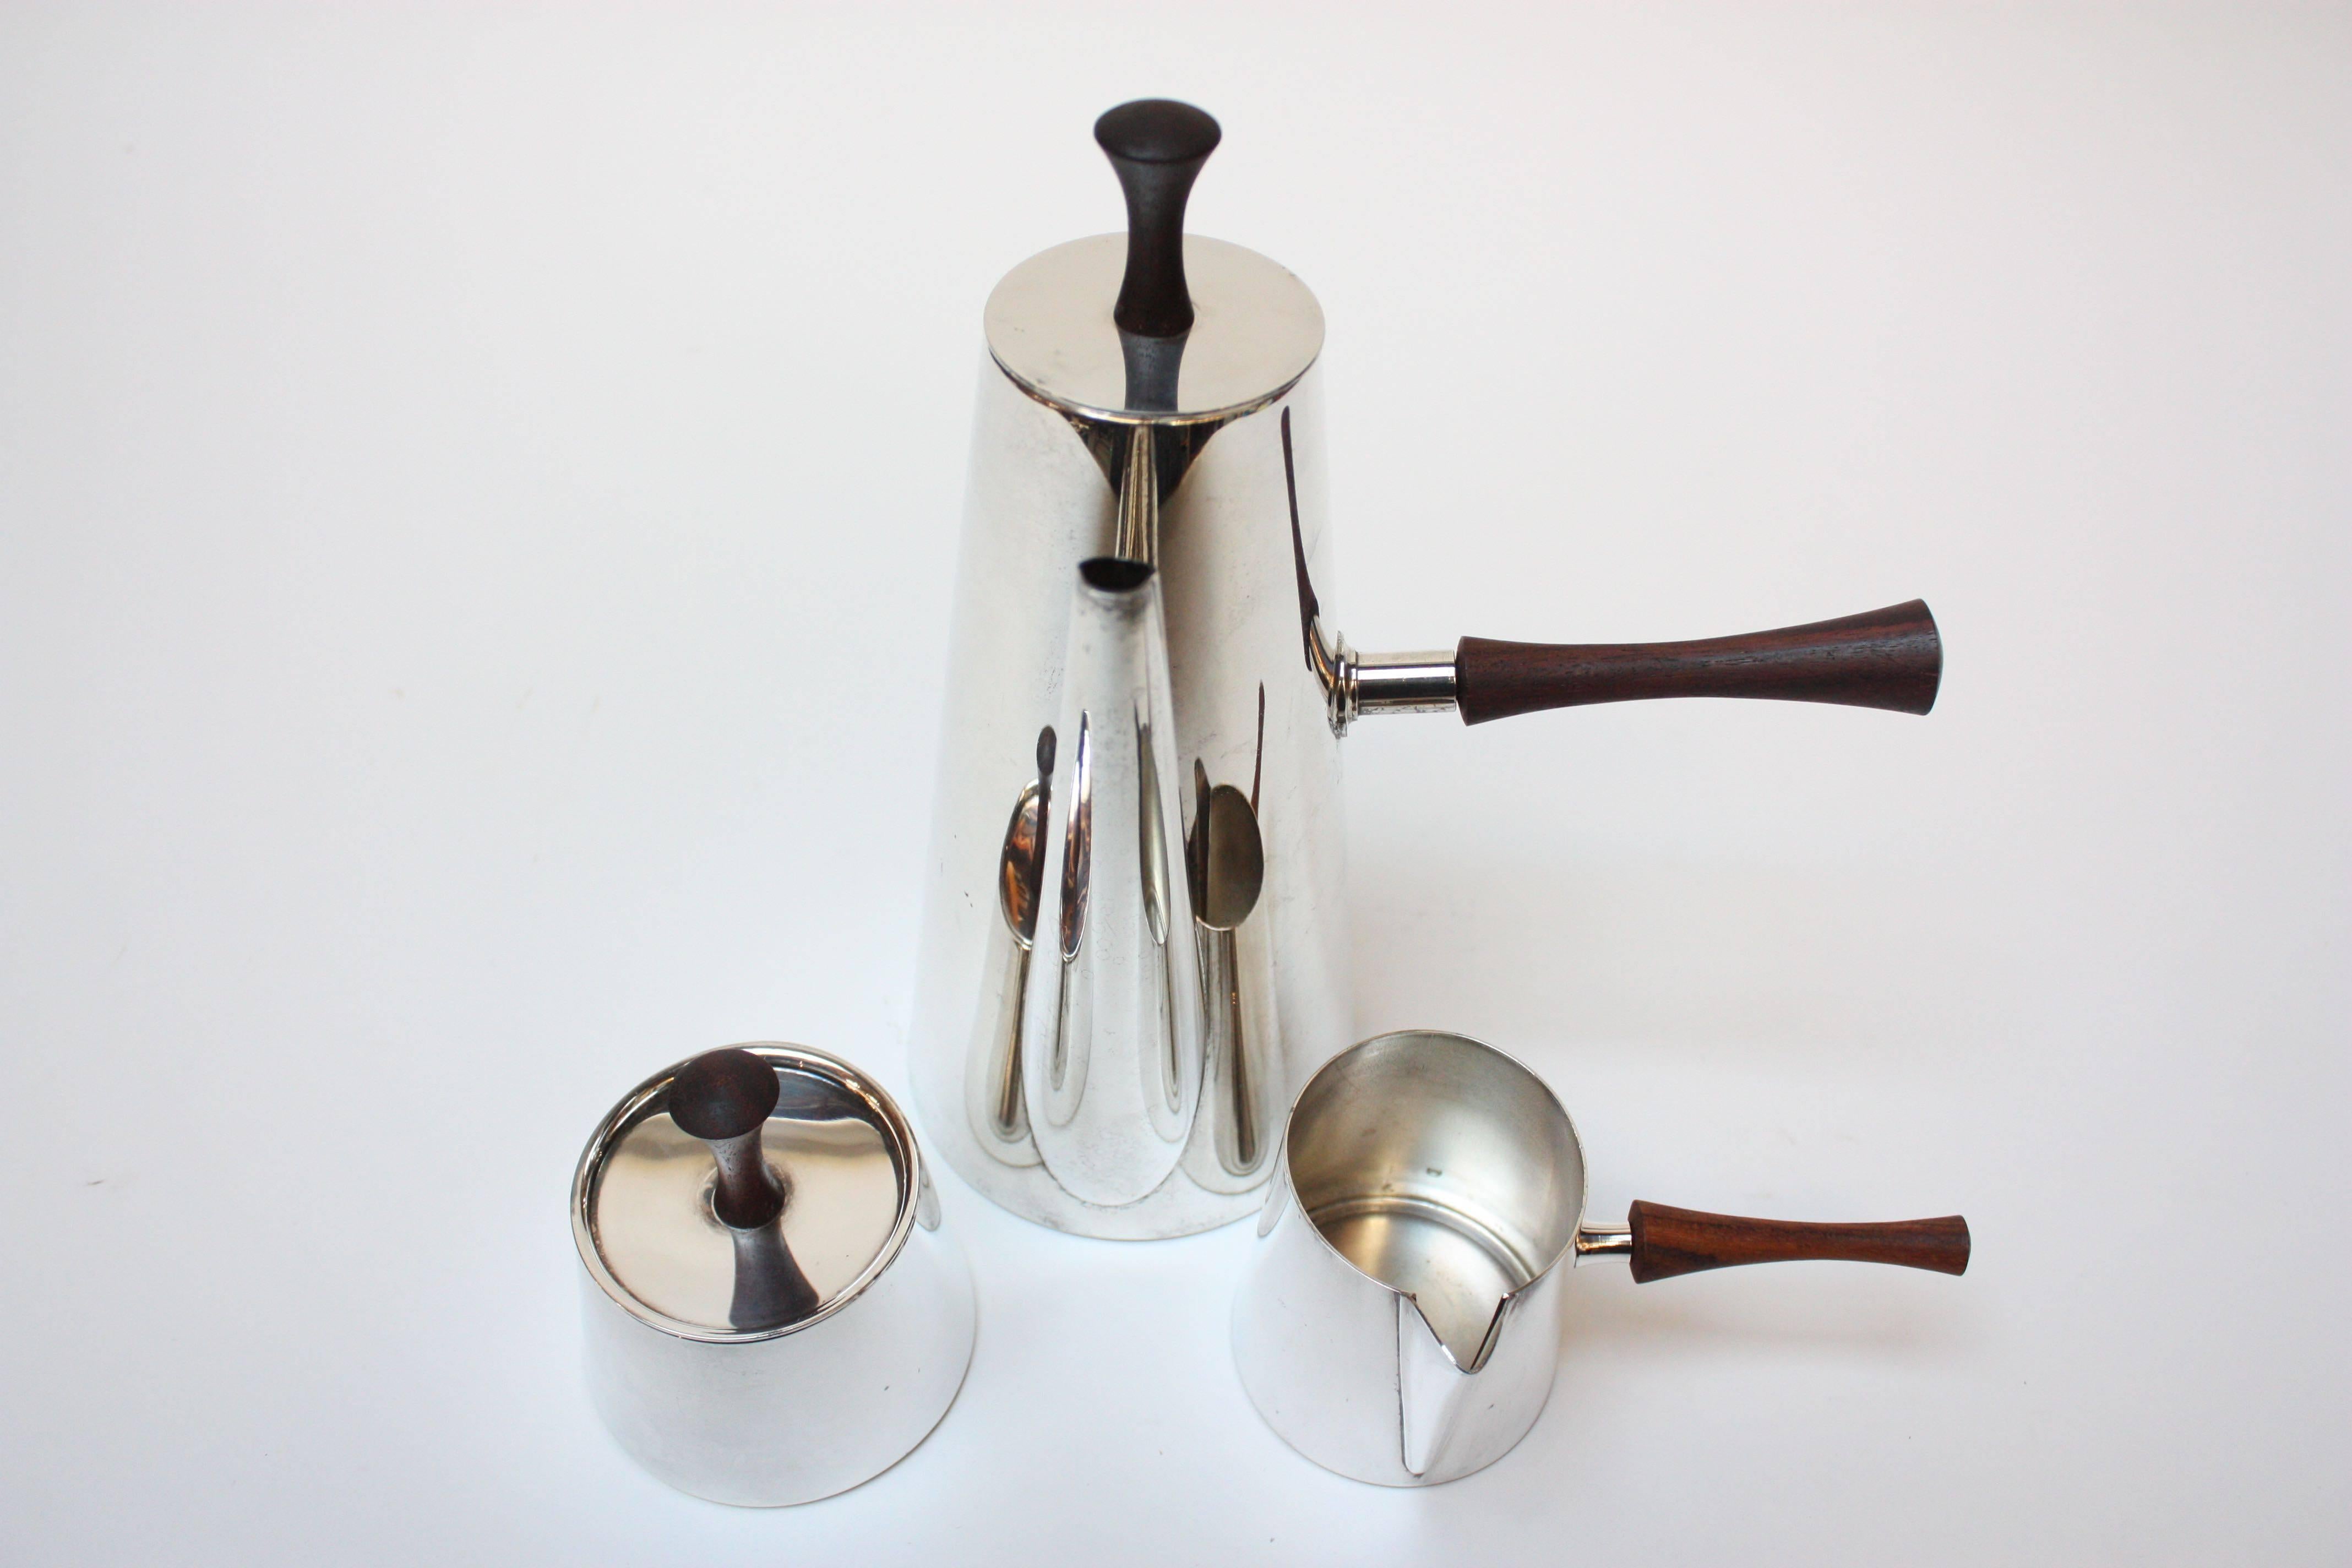 Complete 1950s Italian coffee set, including lidded-pot, lidded-sugar, and creamer, all composed of silver plate with rosewood handles. Excellent, polished condition, bearing the 'Made in Italy' brand to the underside.
Pot measures: H: 9.5